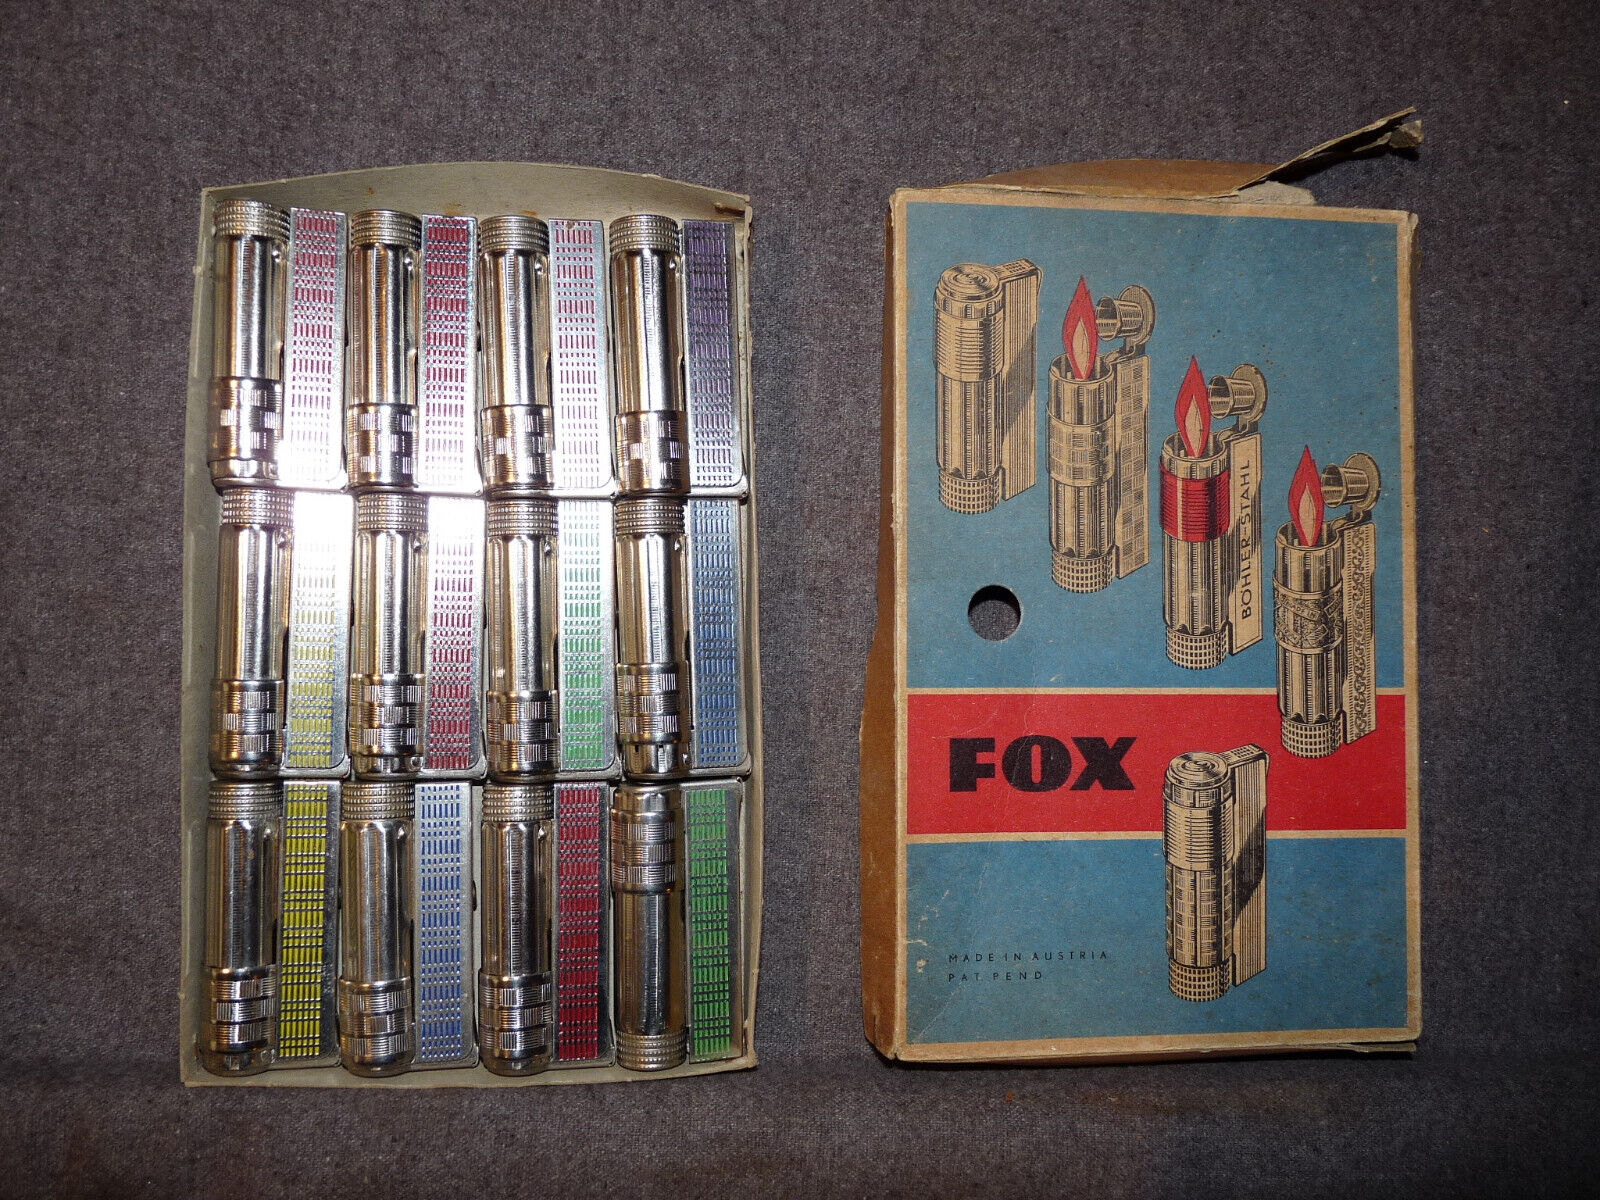 Unused Old Stock - Complete Box Of 12 FOX Made In Austria Lighters - Minty Clean